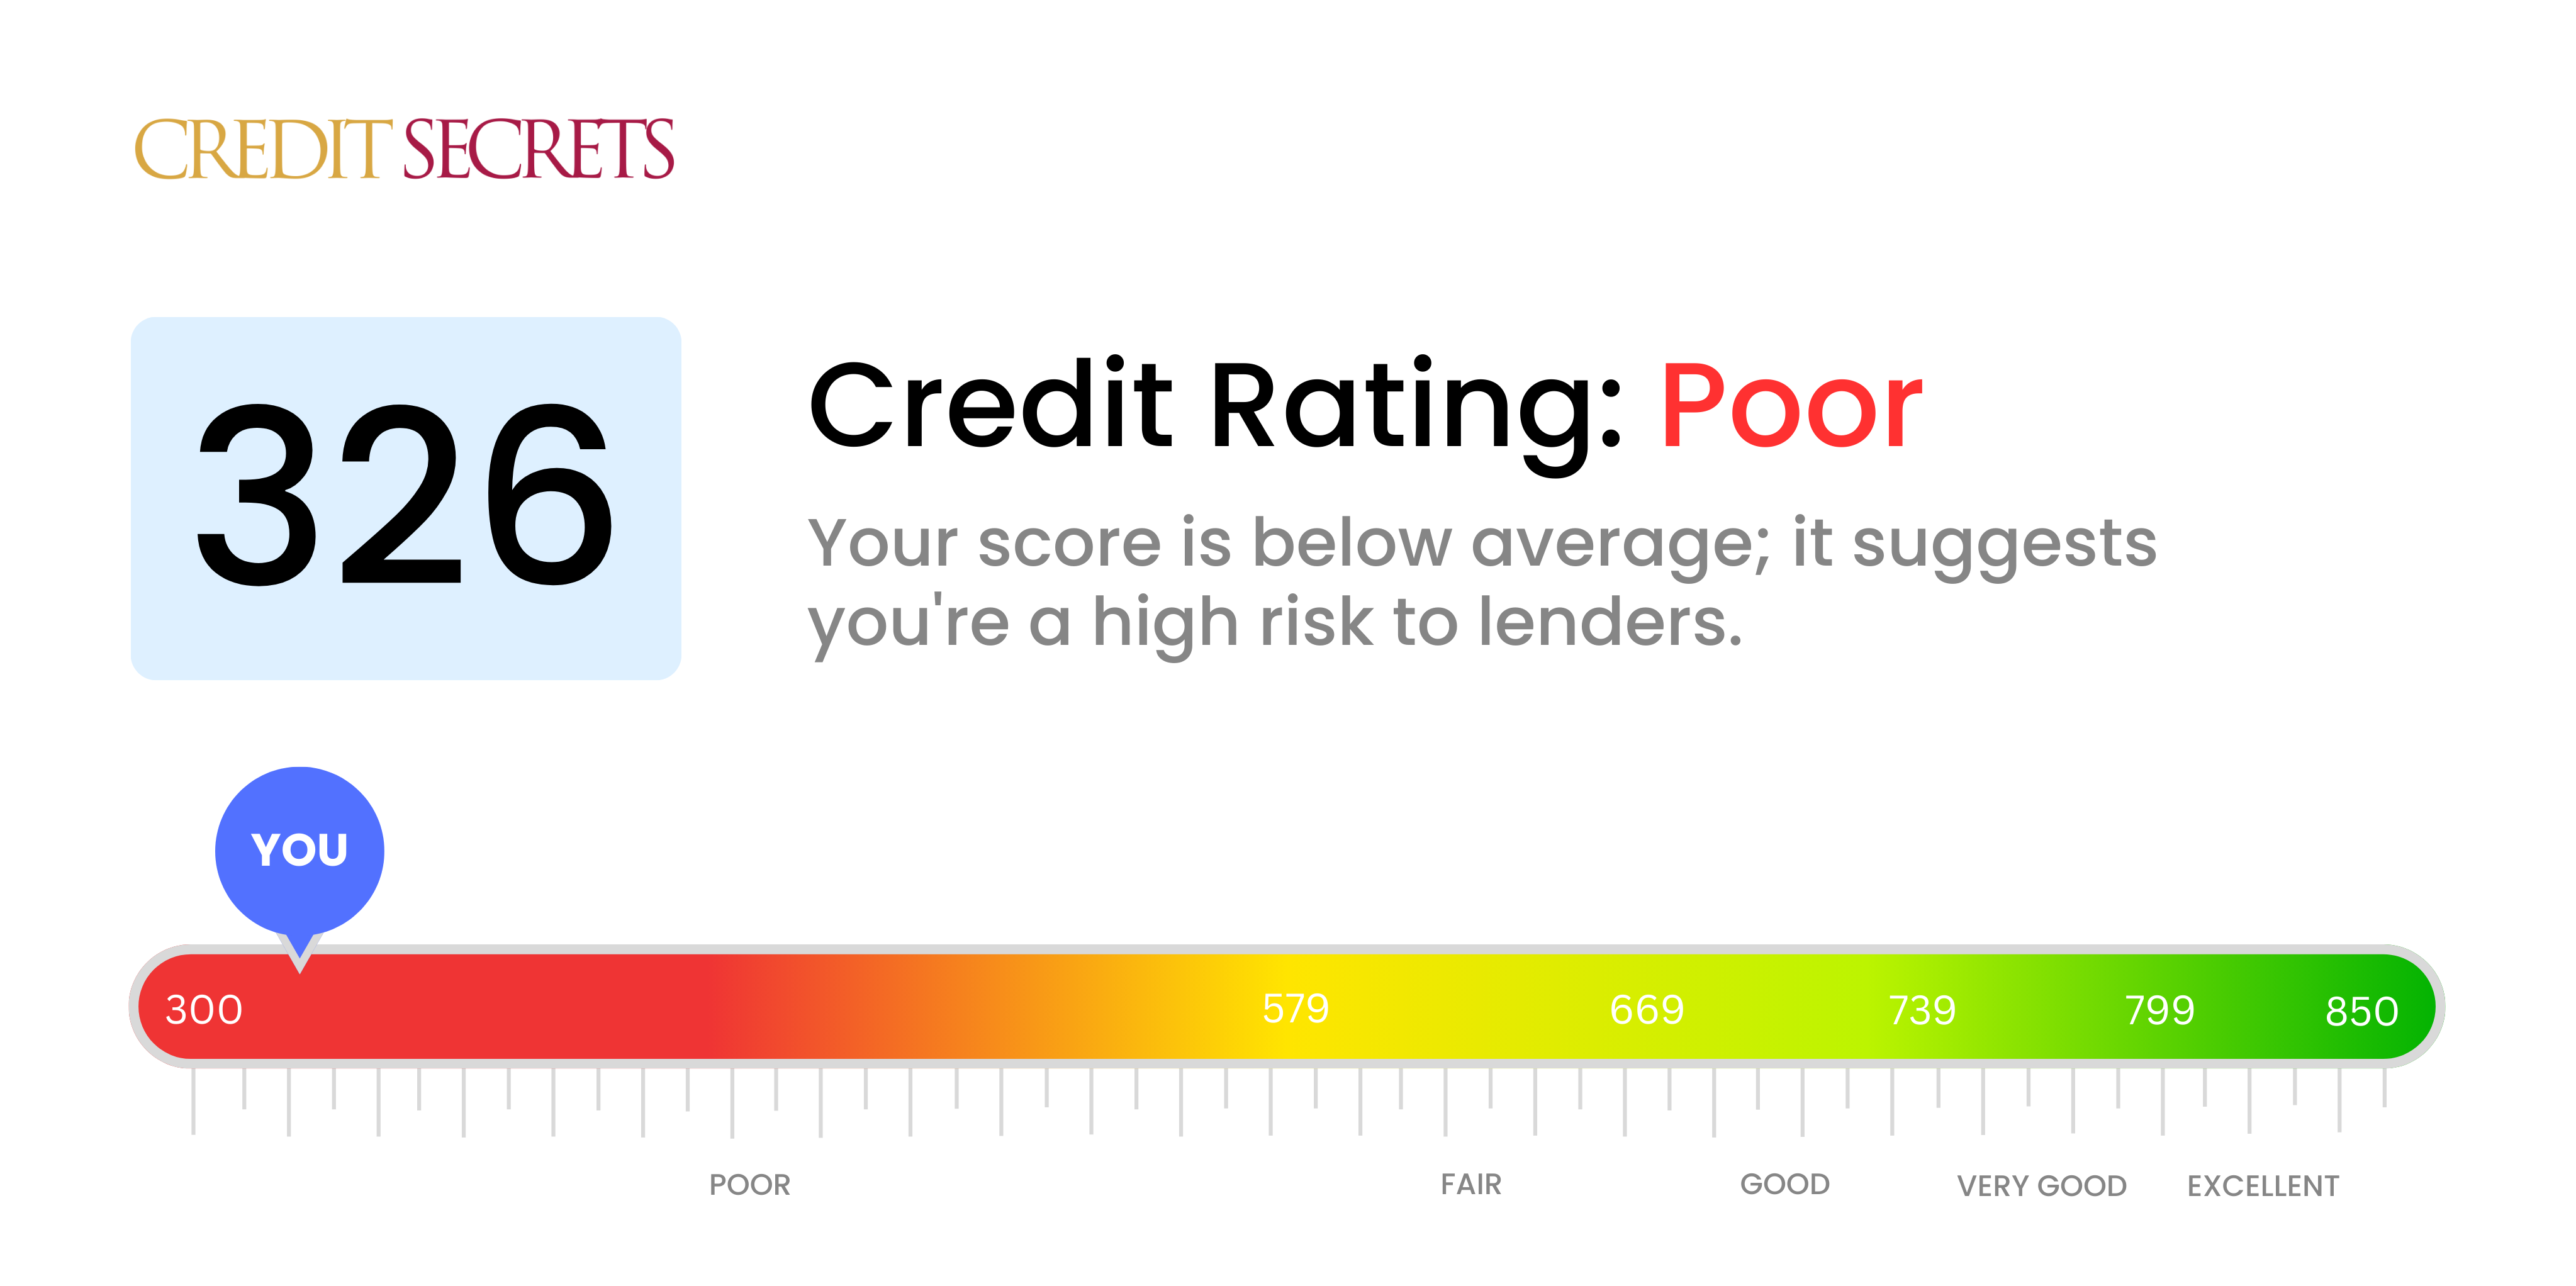 Is 326 a good credit score?